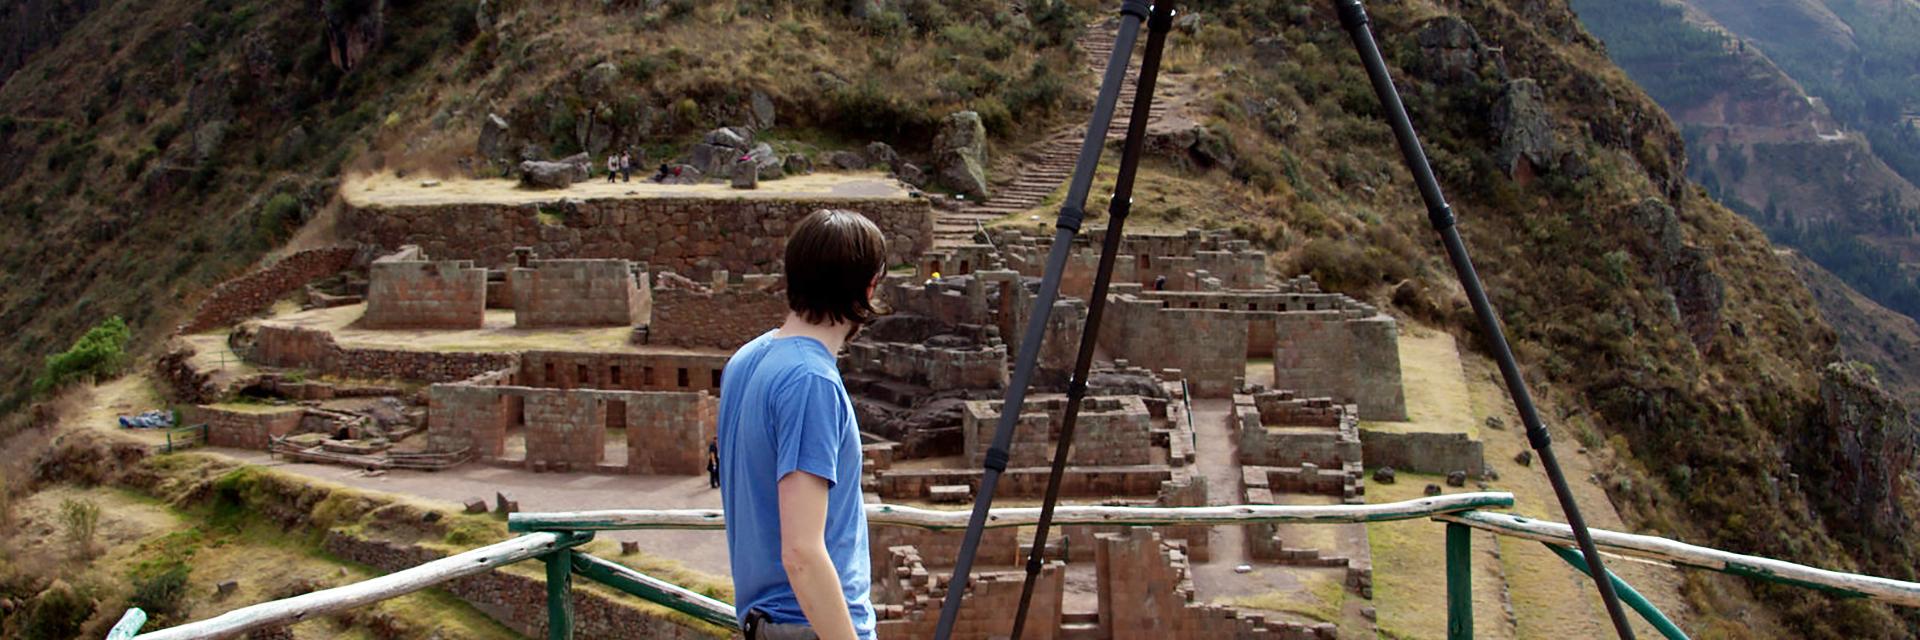 Jon Blundell, a 3D digitization specialist at the Smithsonian, capturing 3D data points of the Inka archaeological site at Pisac. Pisac, Peru, 2014. Photo by Samy Chiclla